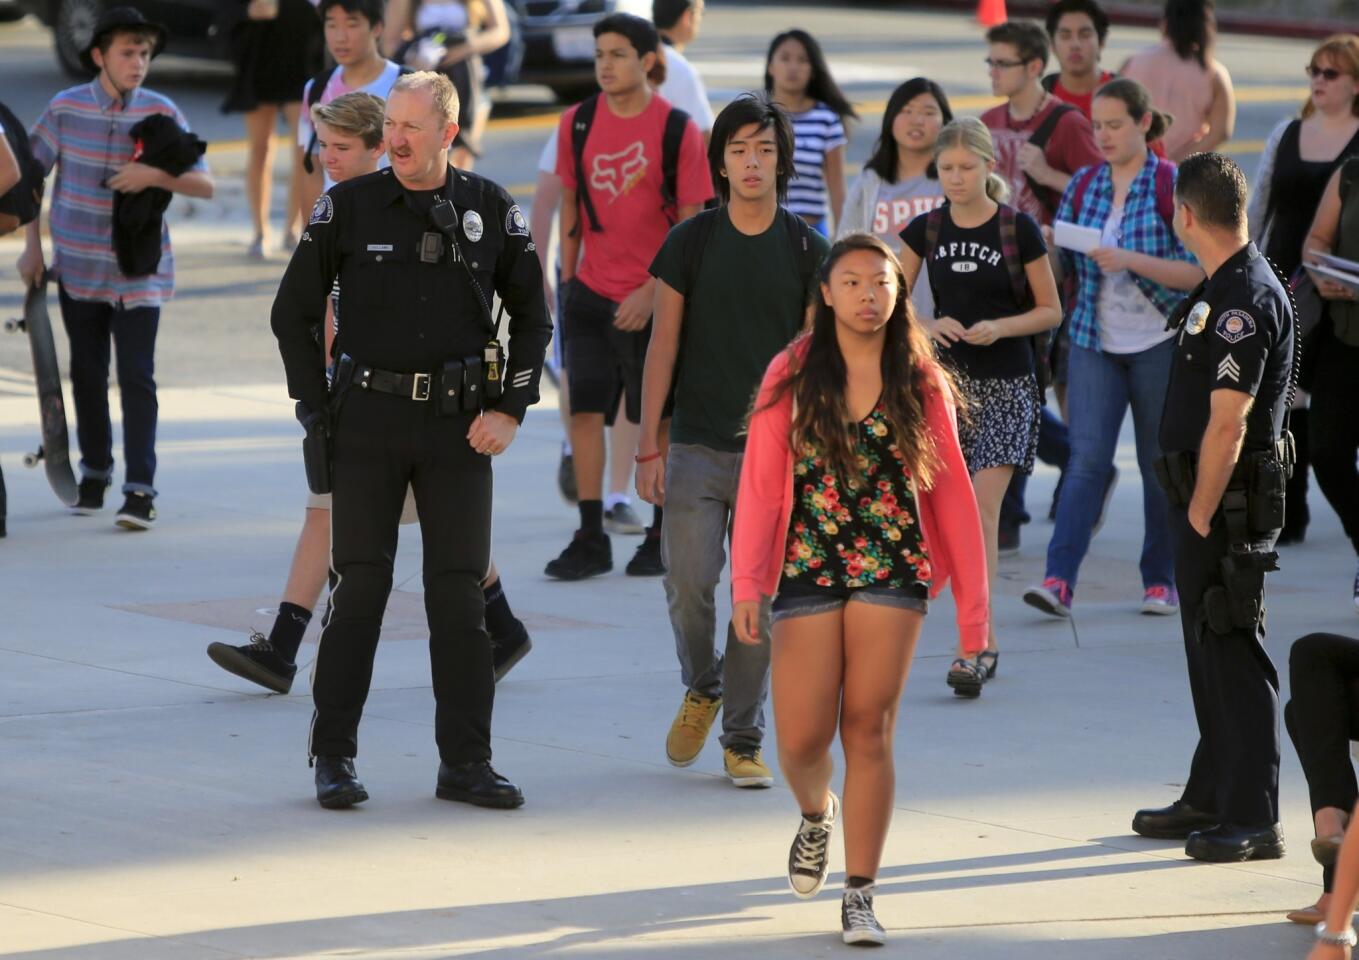 Students arrive for the first day of school at South Pasadena High School and are greeted by an increased police presence.